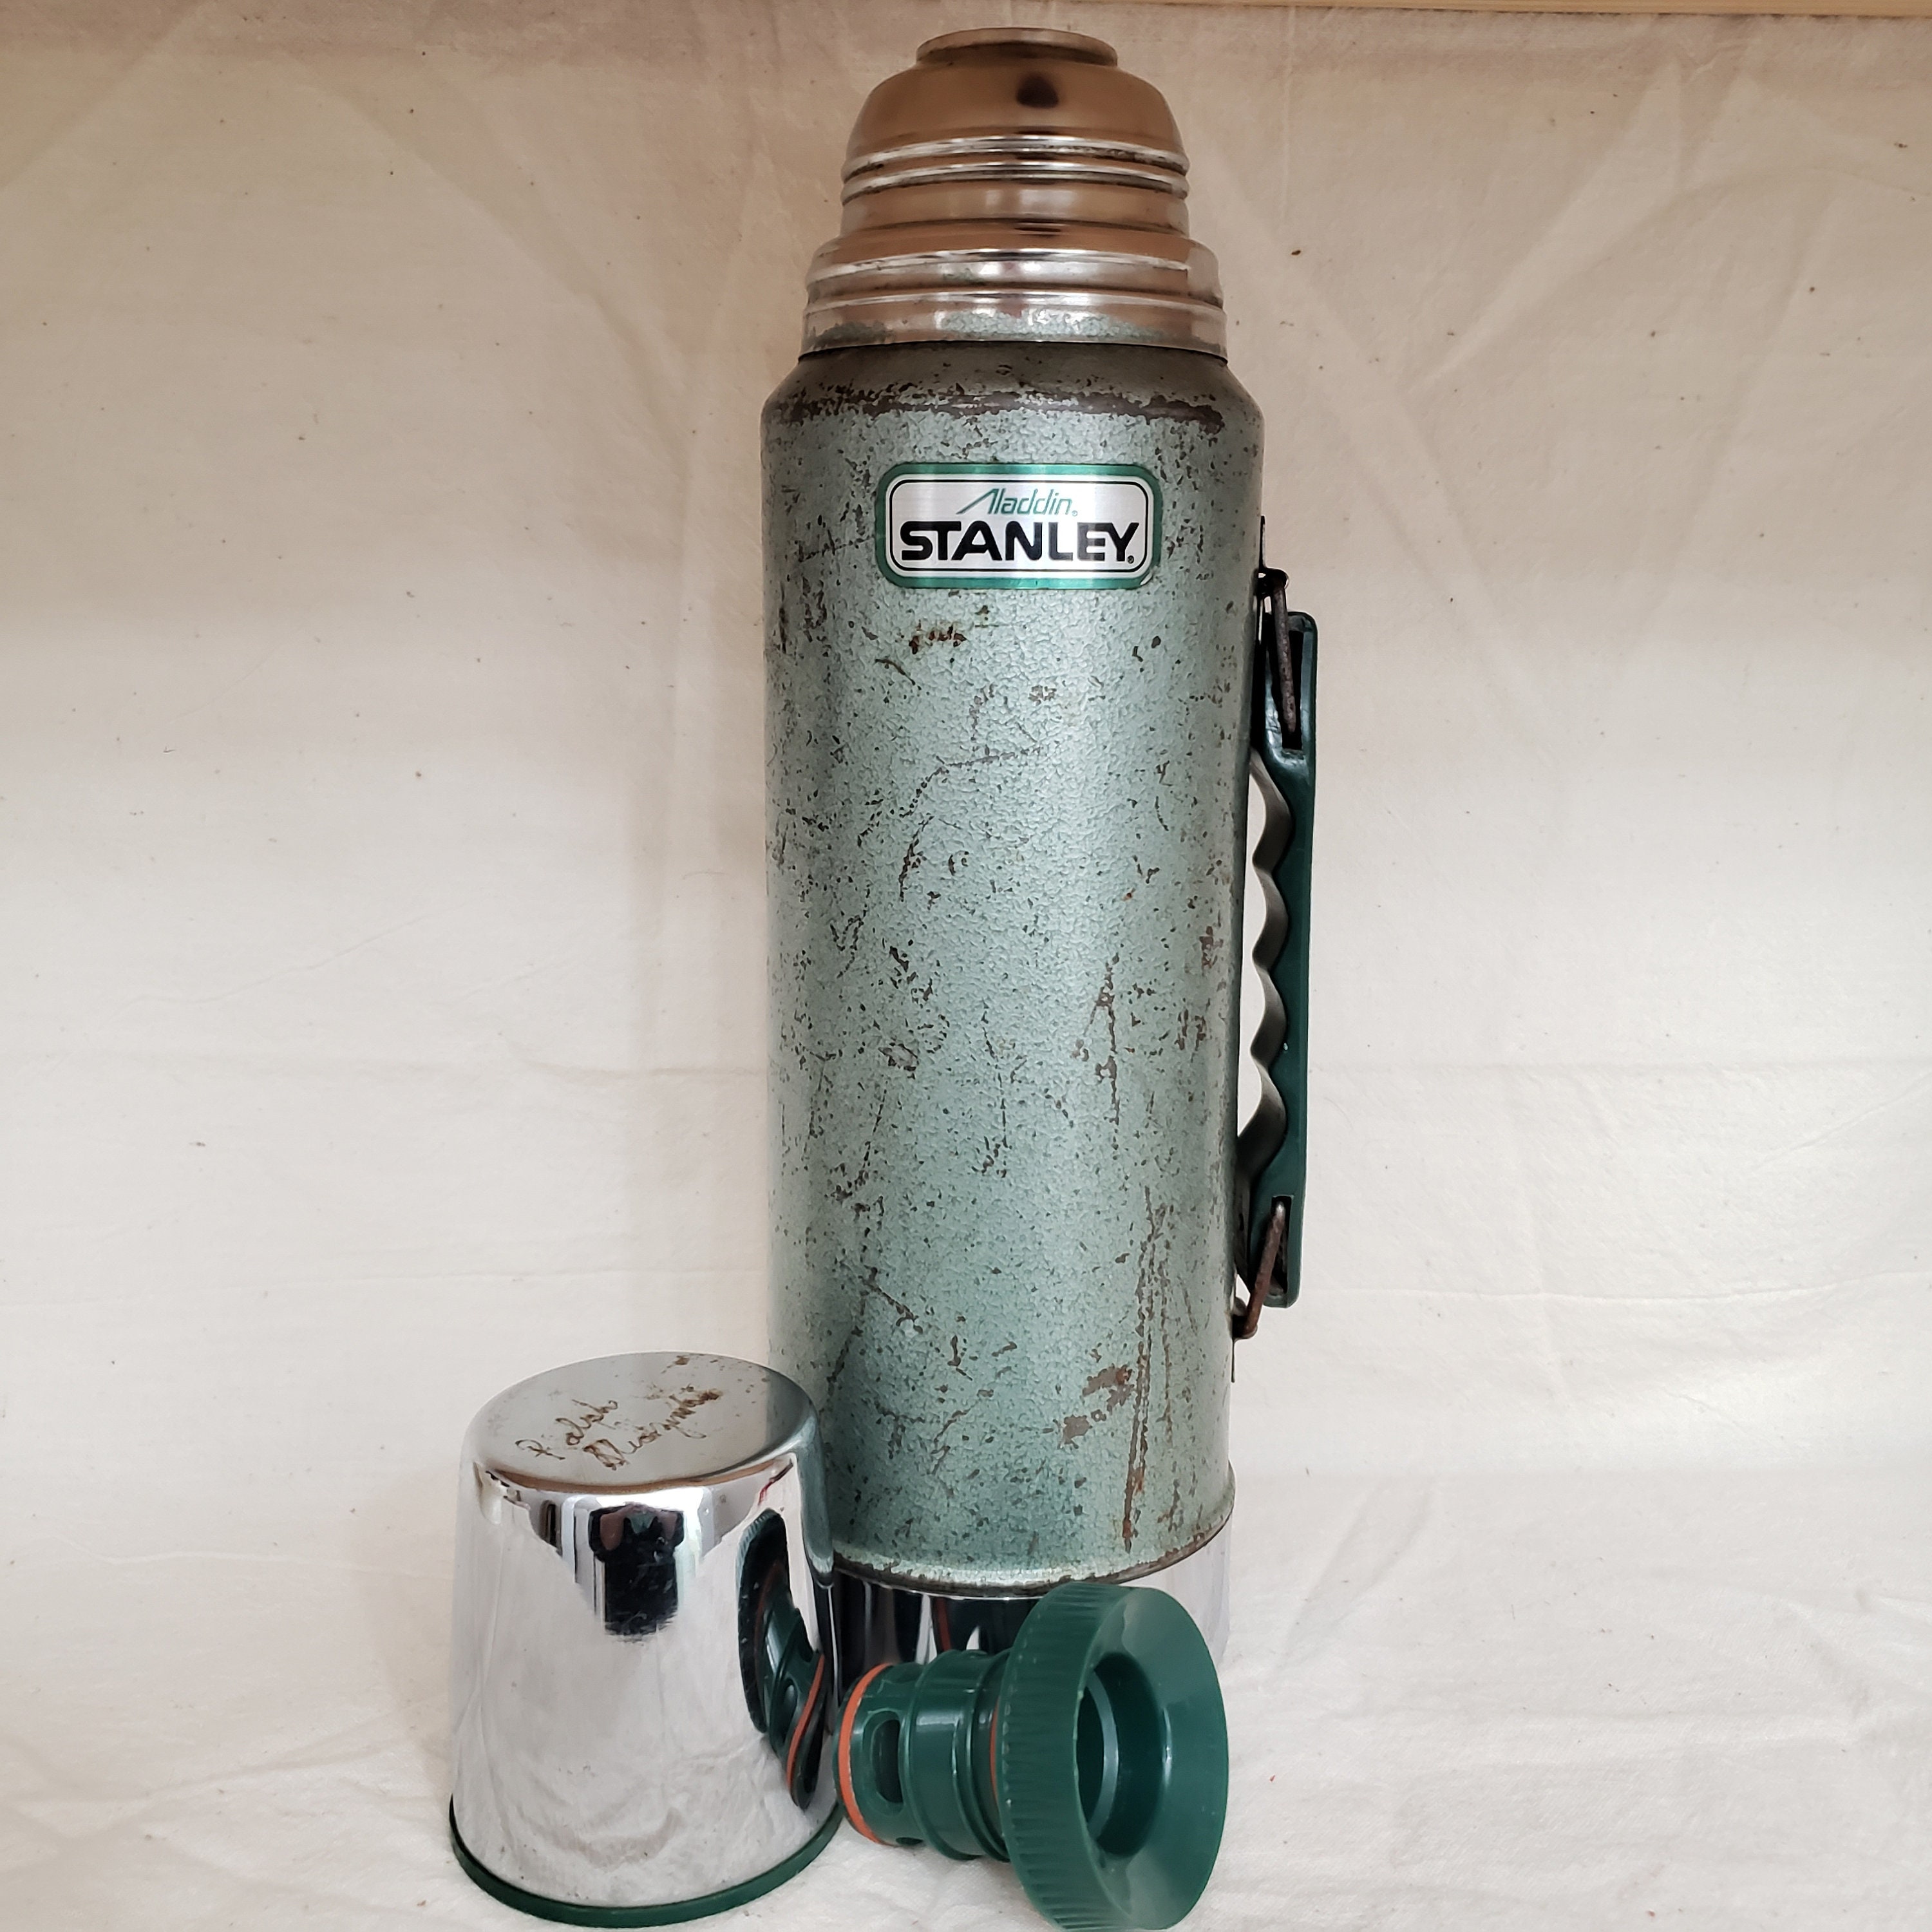 Vintage Aladdin Stanley Stainless Steel Thermos Bottle – The Stand Alone